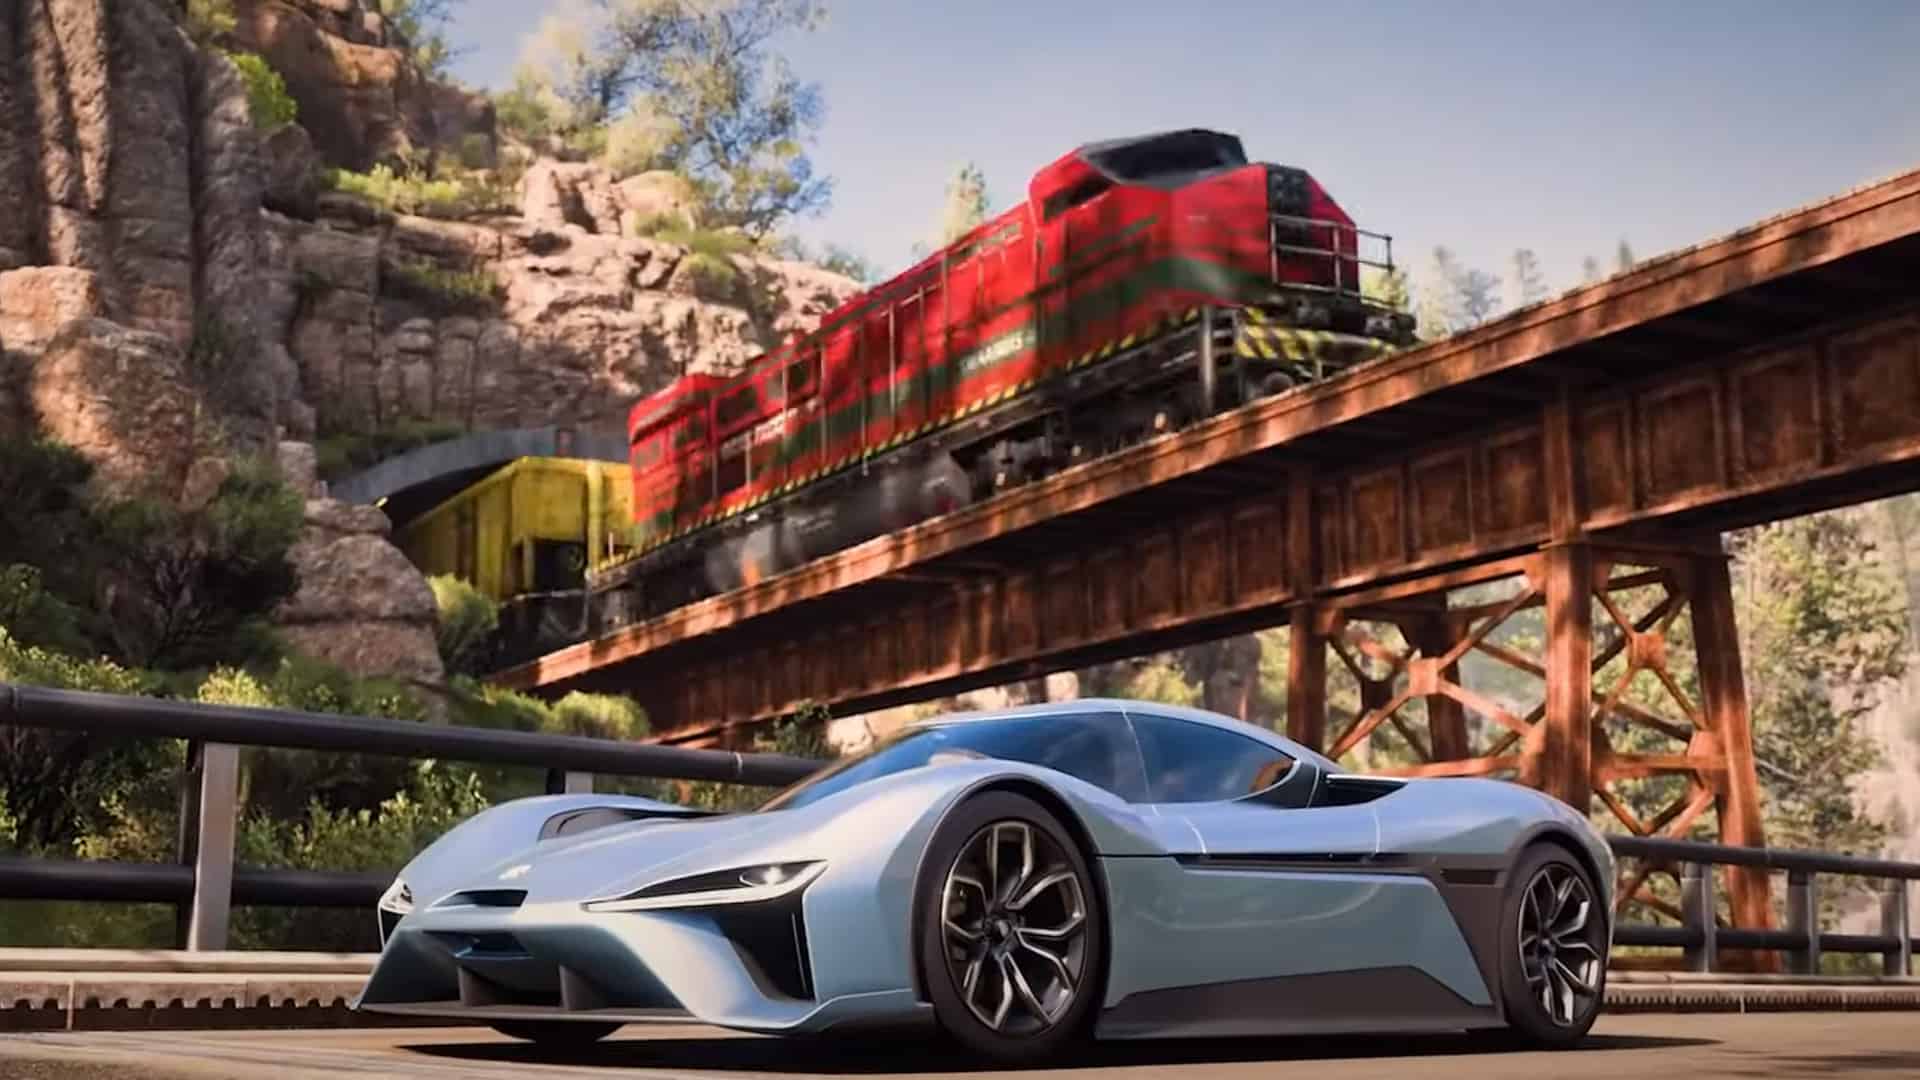 Forza Horizon 4 Series 21 Update Will Include These 6 Cars